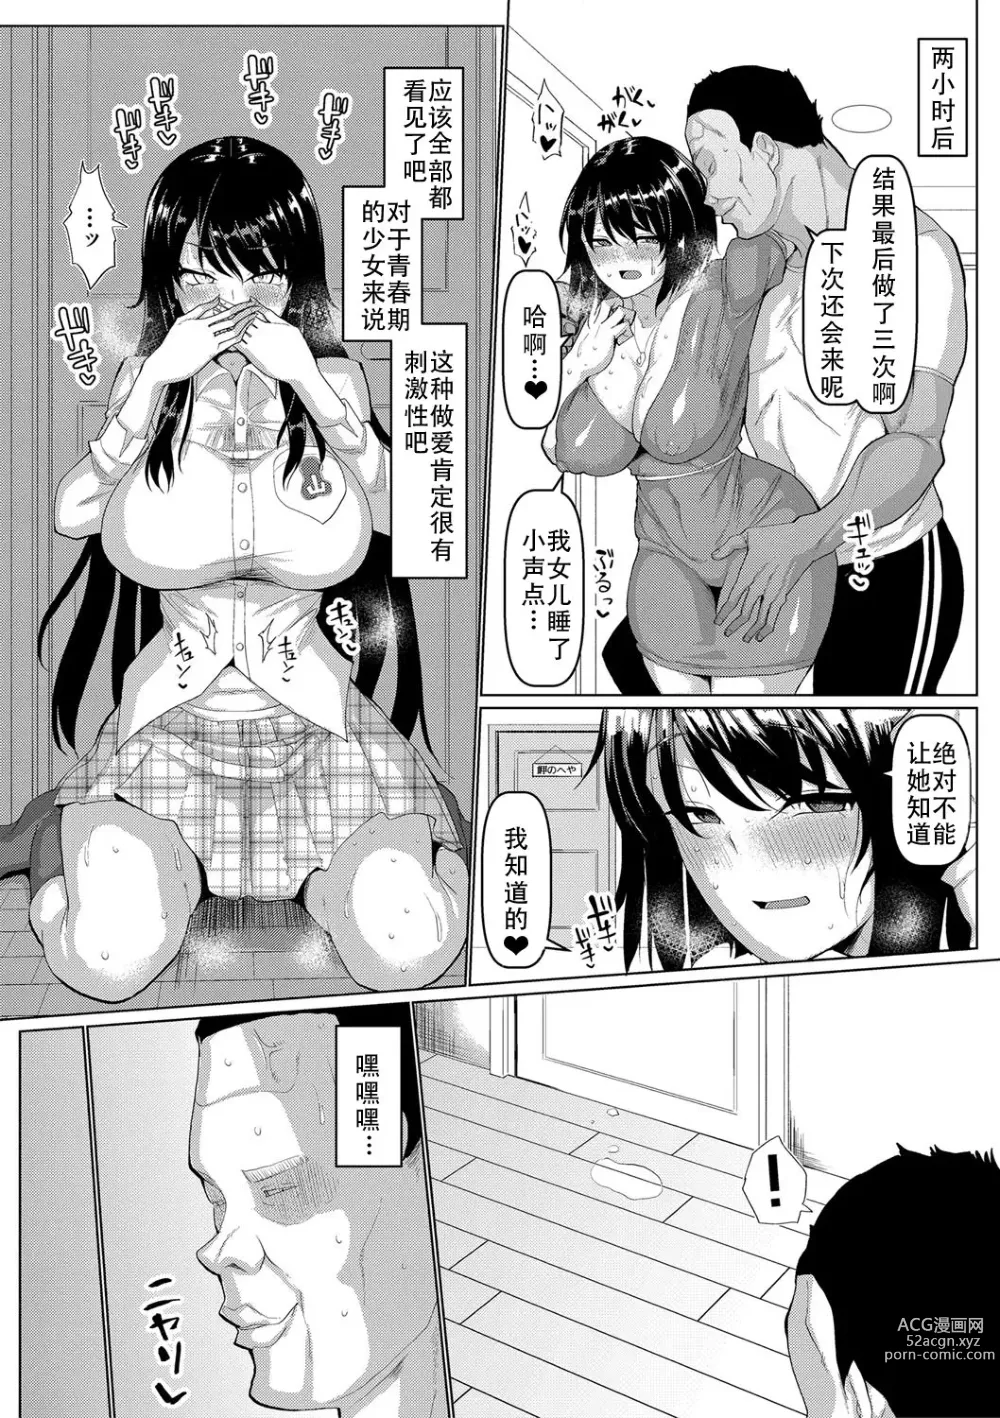 Page 11 of manga Oyako de Nerae! Sex Number One